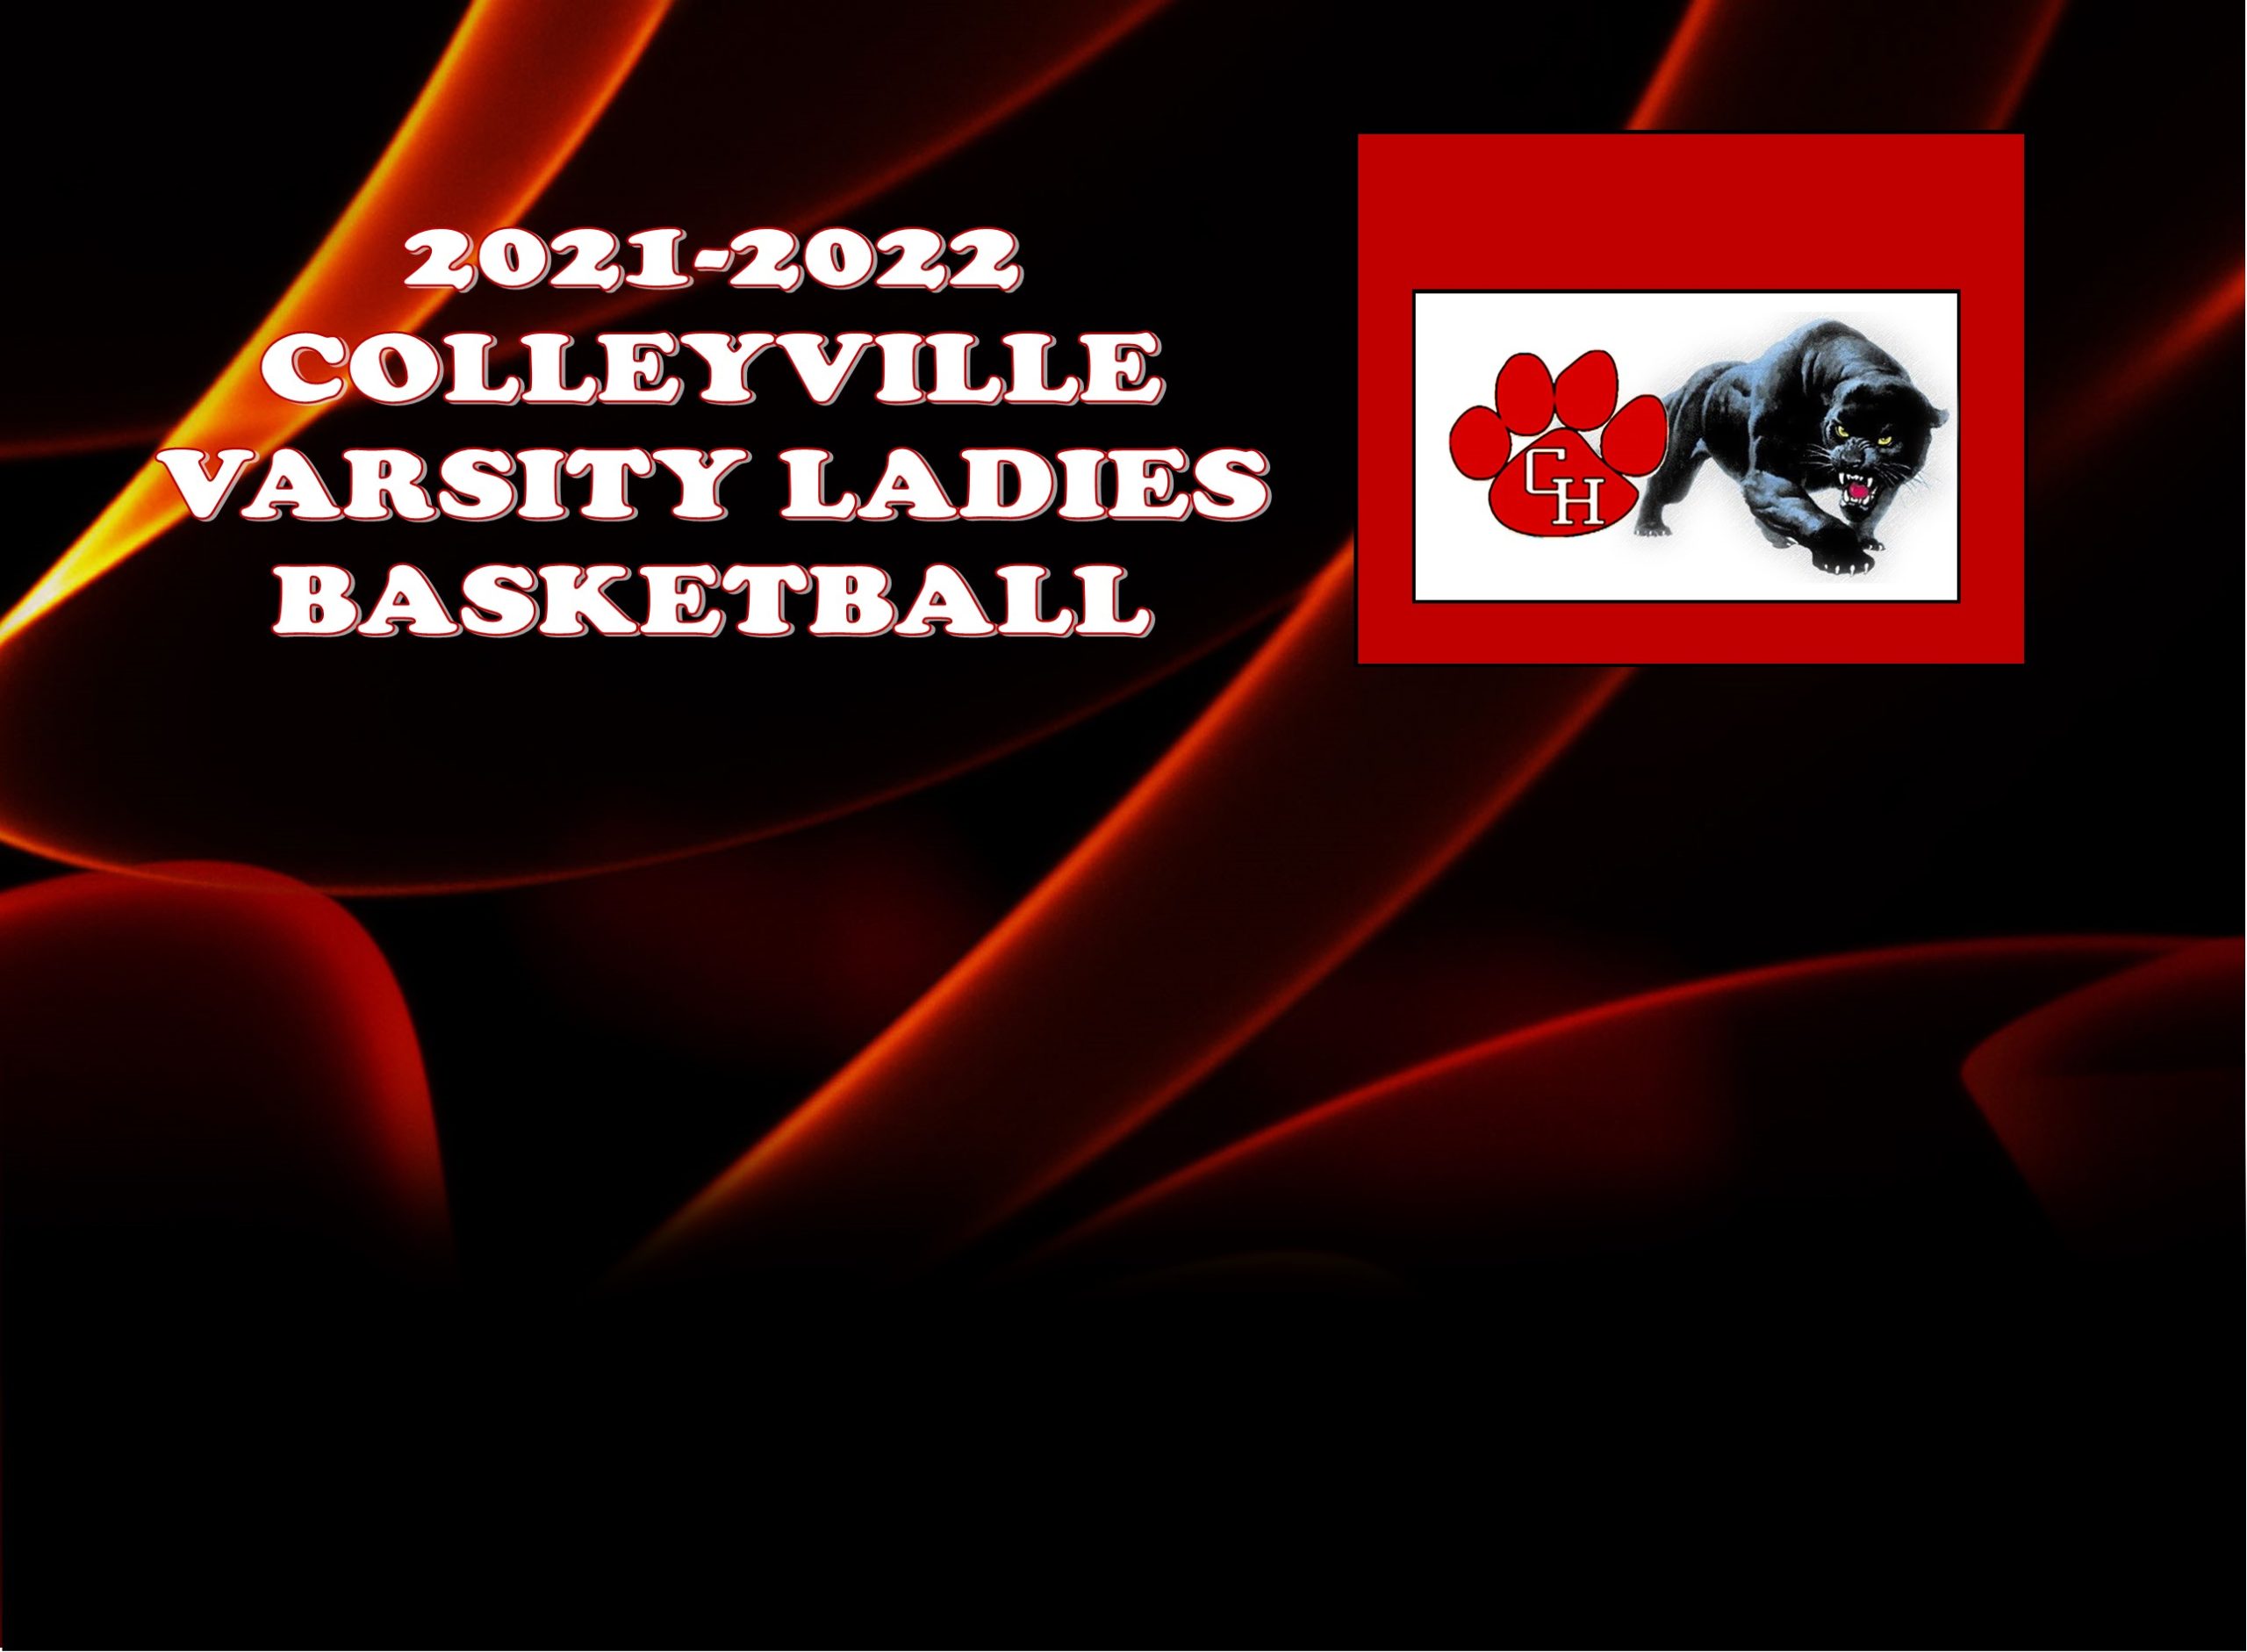 GCISD Basketball: Colleyville Lady Panthers Upended by McKinney Lady Lions 55-50